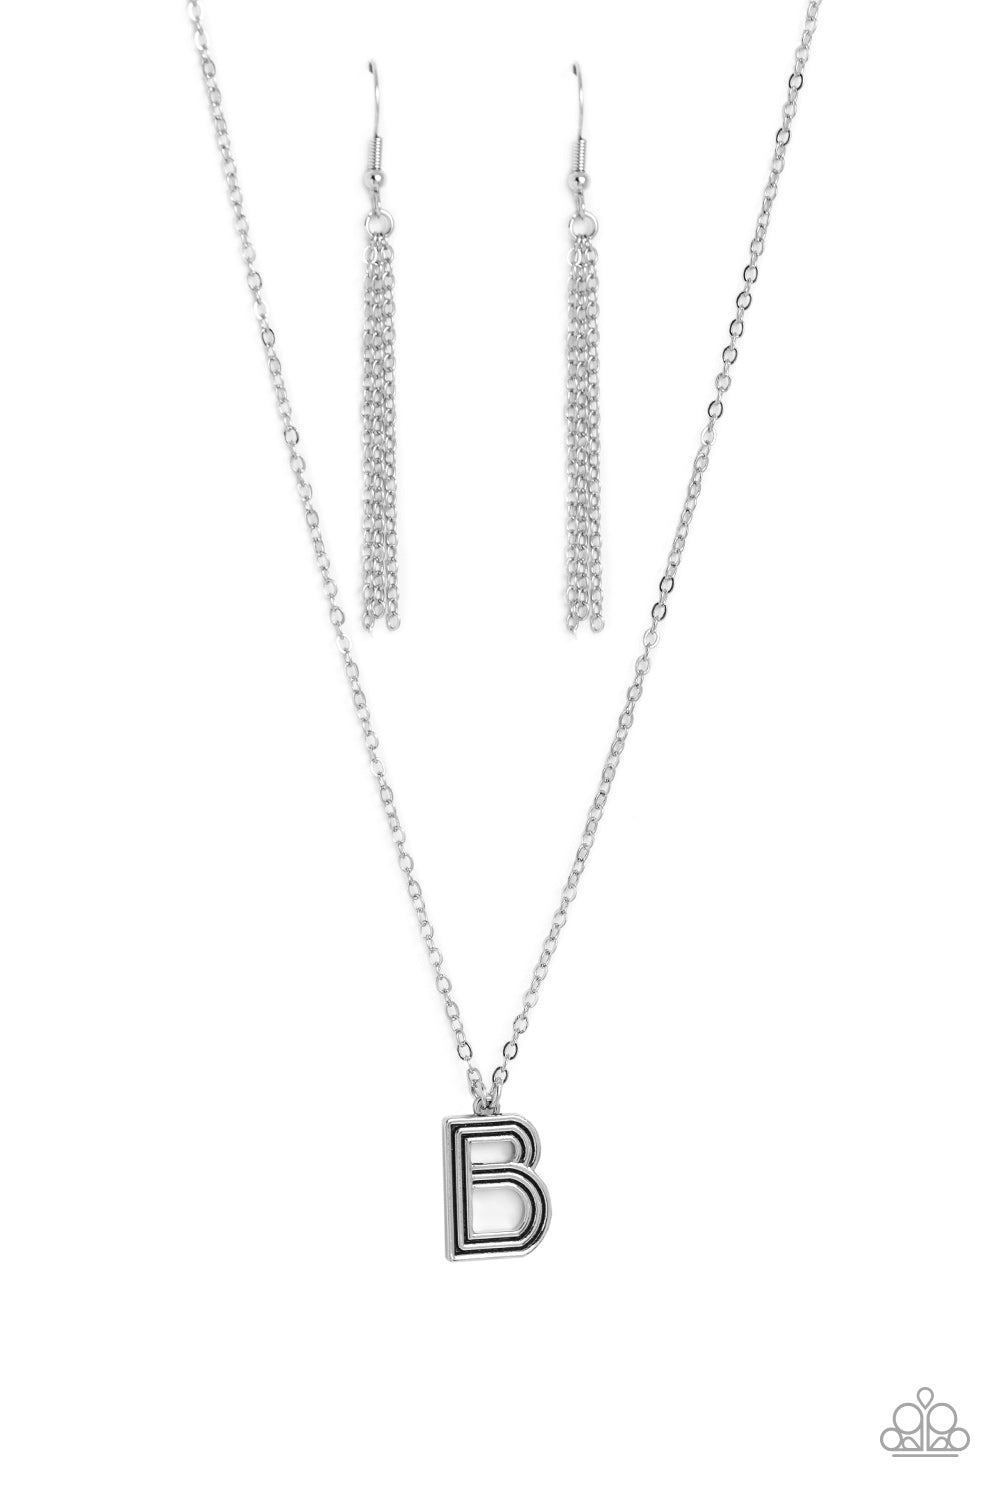 five-dollar-jewelry-leave-your-initials-silver-b-paparazzi-accessories